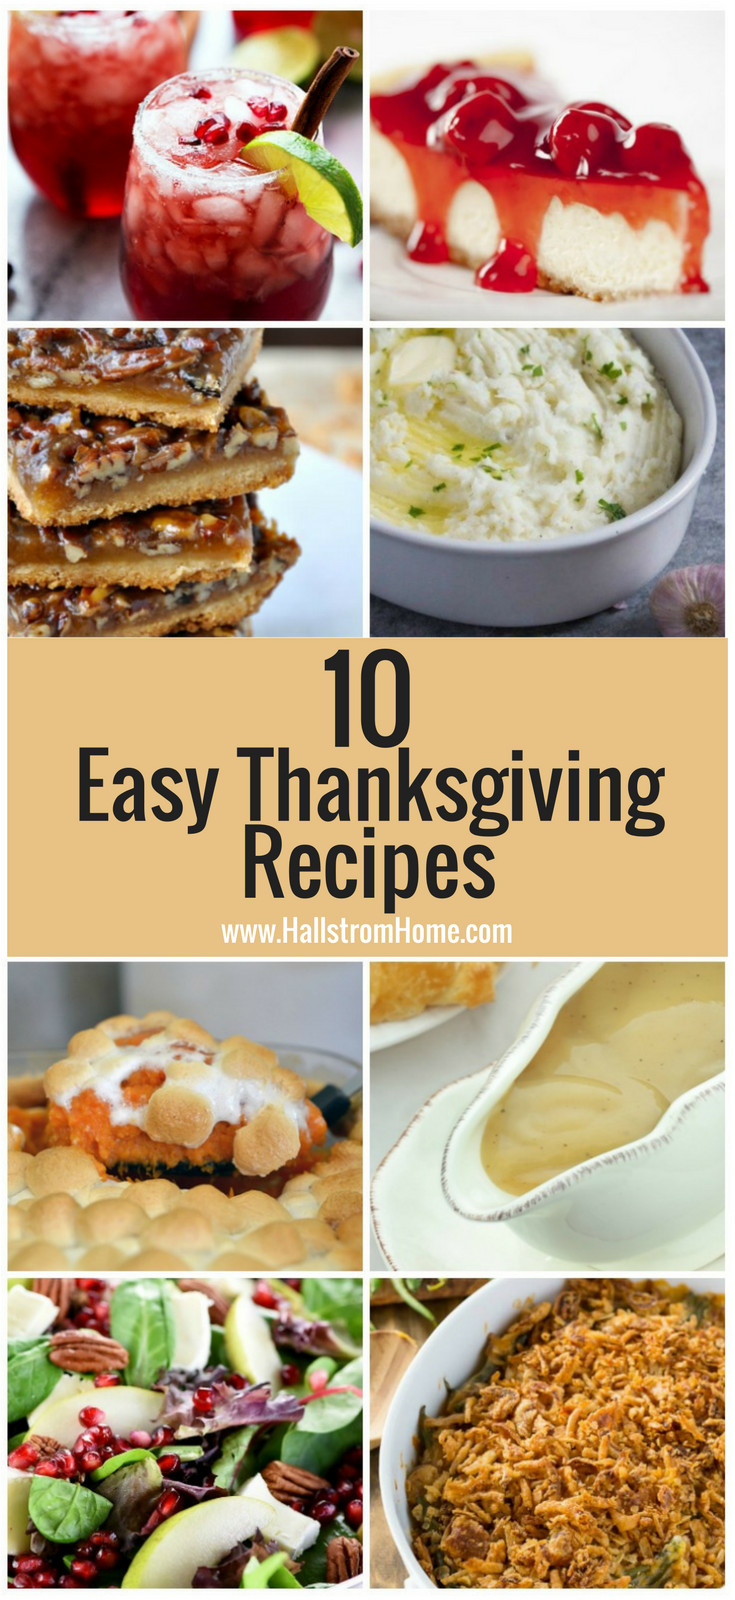 Quick And Easy Thanksgiving Desserts
 10 Quick and Easy Thanksgiving Recipes Hallstrom Home